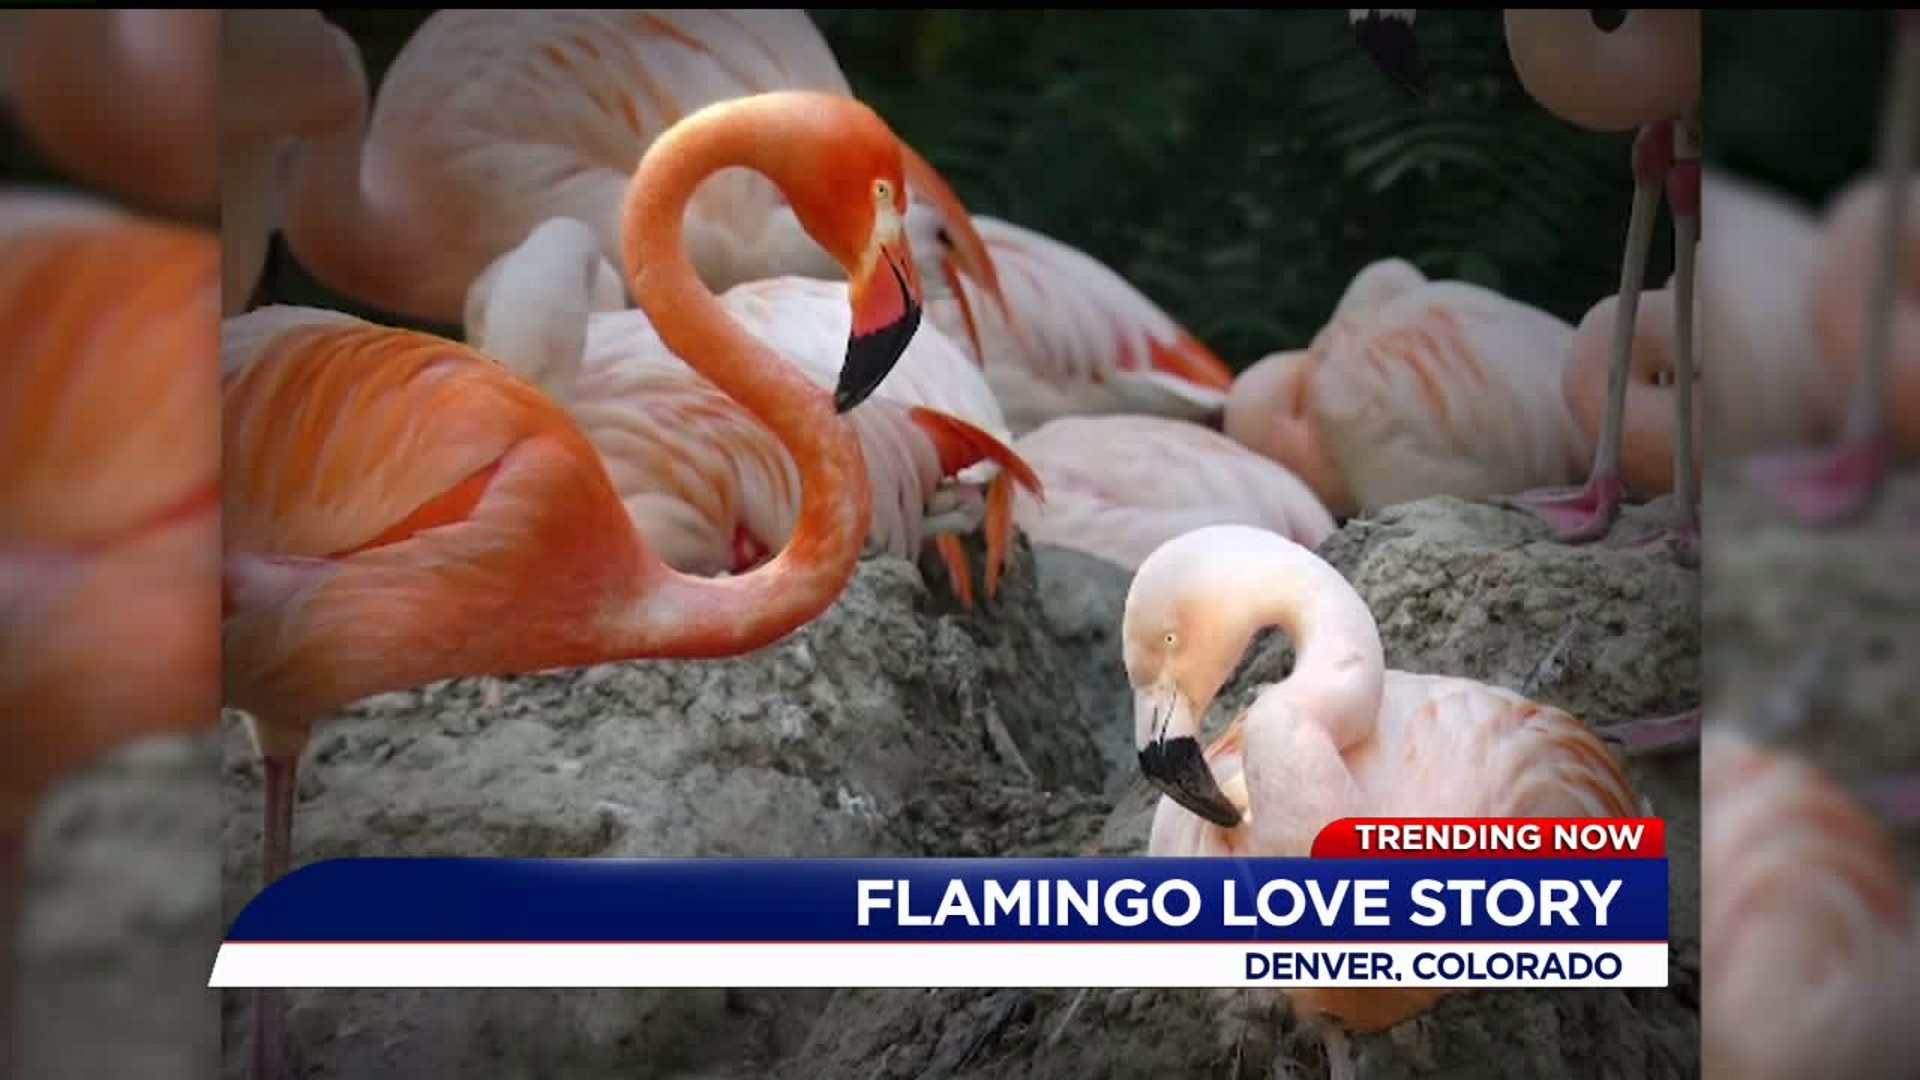 Denver Zoo says two male flamingos have been together for several years, could raise chick